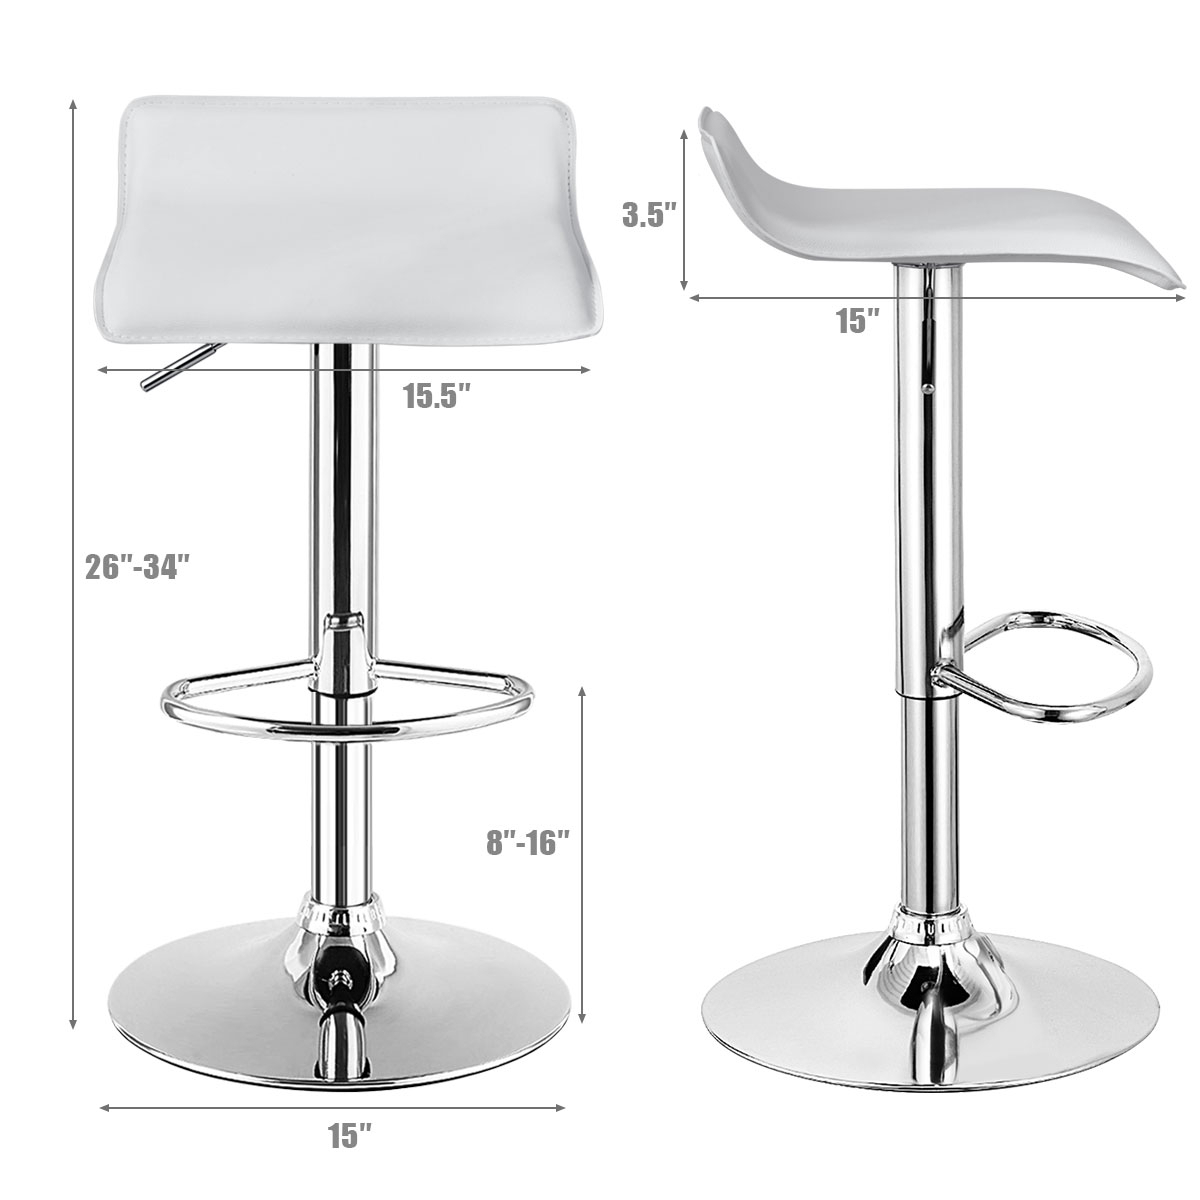 Swivel Bar Stools Adjustable Pu Leather, Backless Dining Chair